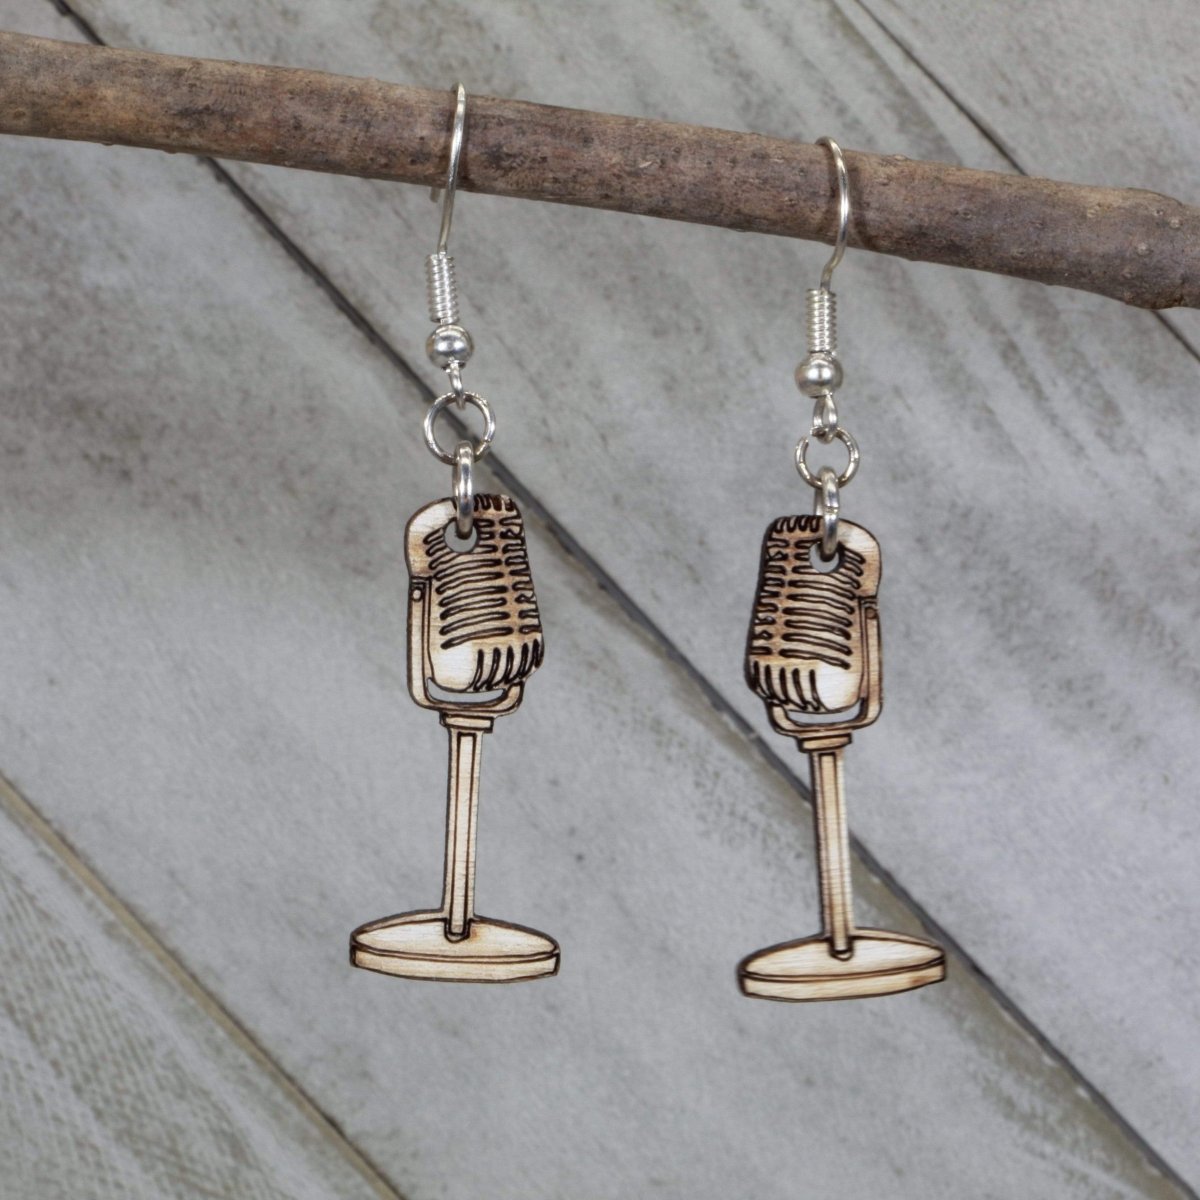 Retro Microphones Dangle Earrings - - Cate's Concepts, LLC